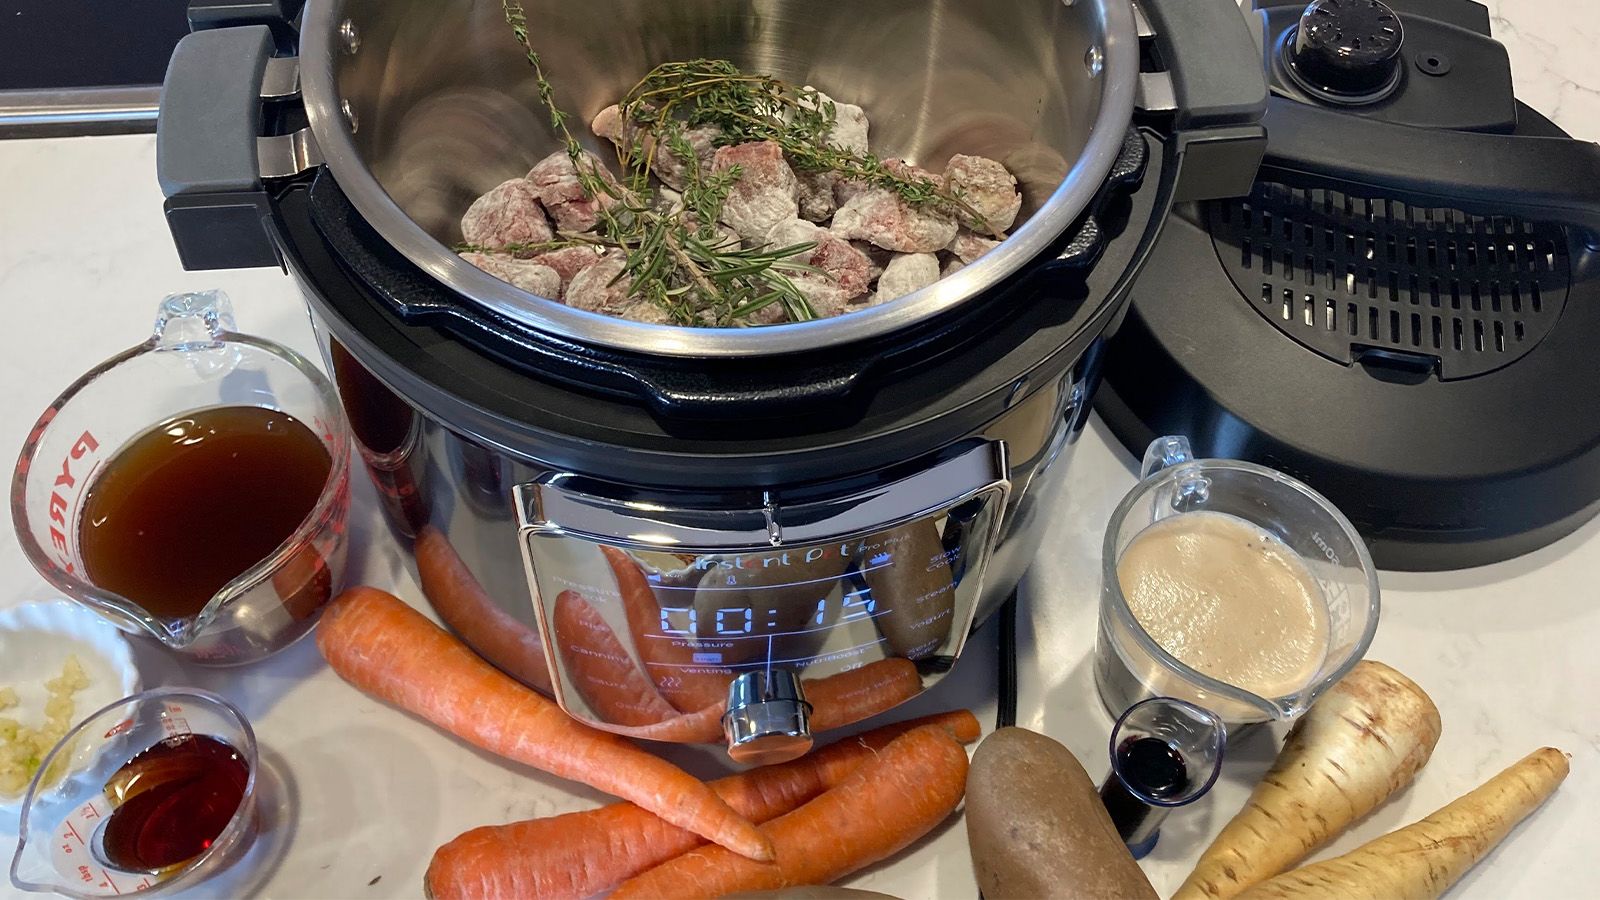 Instant Pot rolls out line of Stars Wars-themed pressure cookers